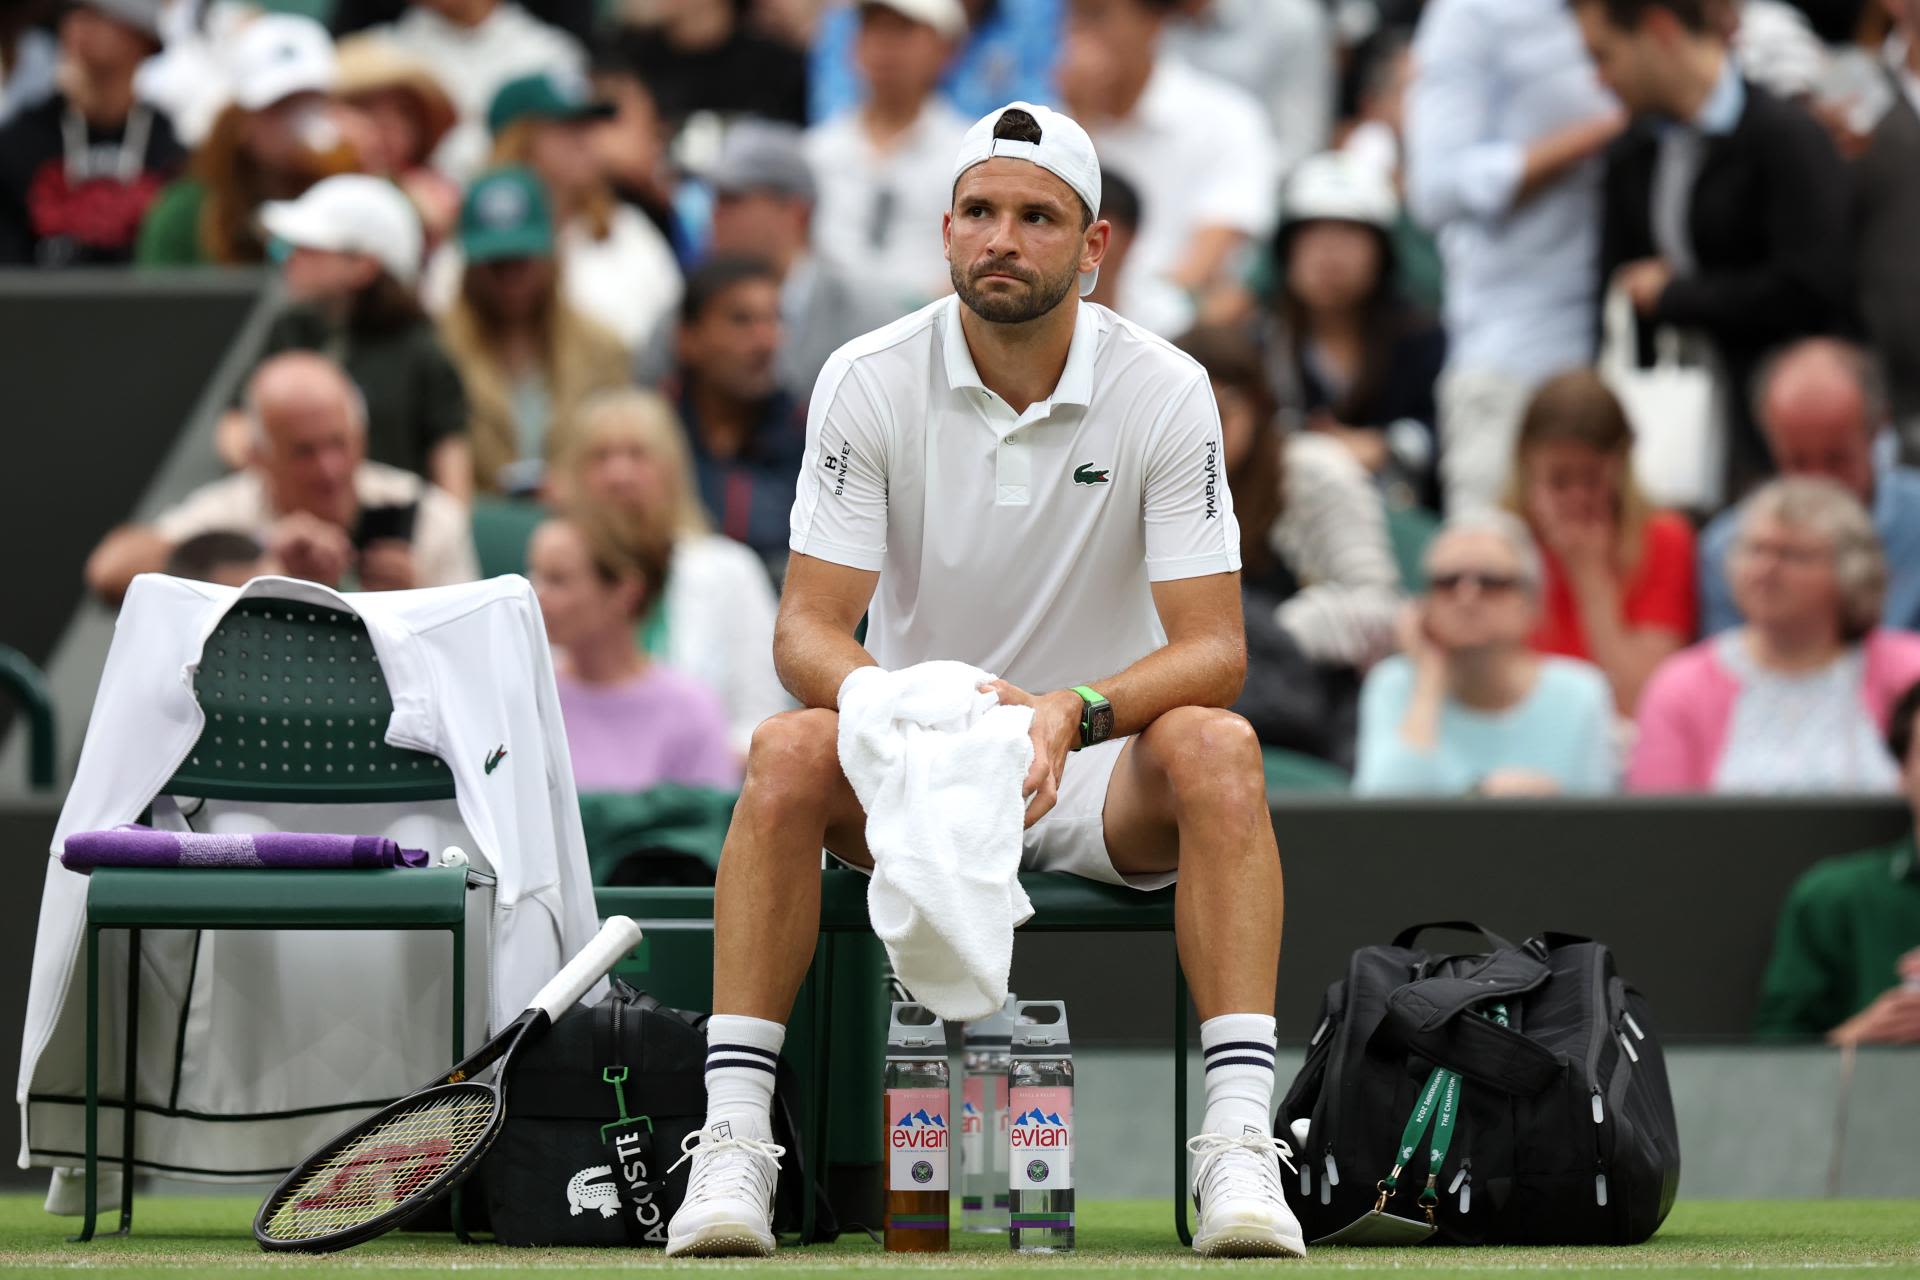 Grigor Dimitrov issues tough injury update after heartbreaking Wimbledon retirement